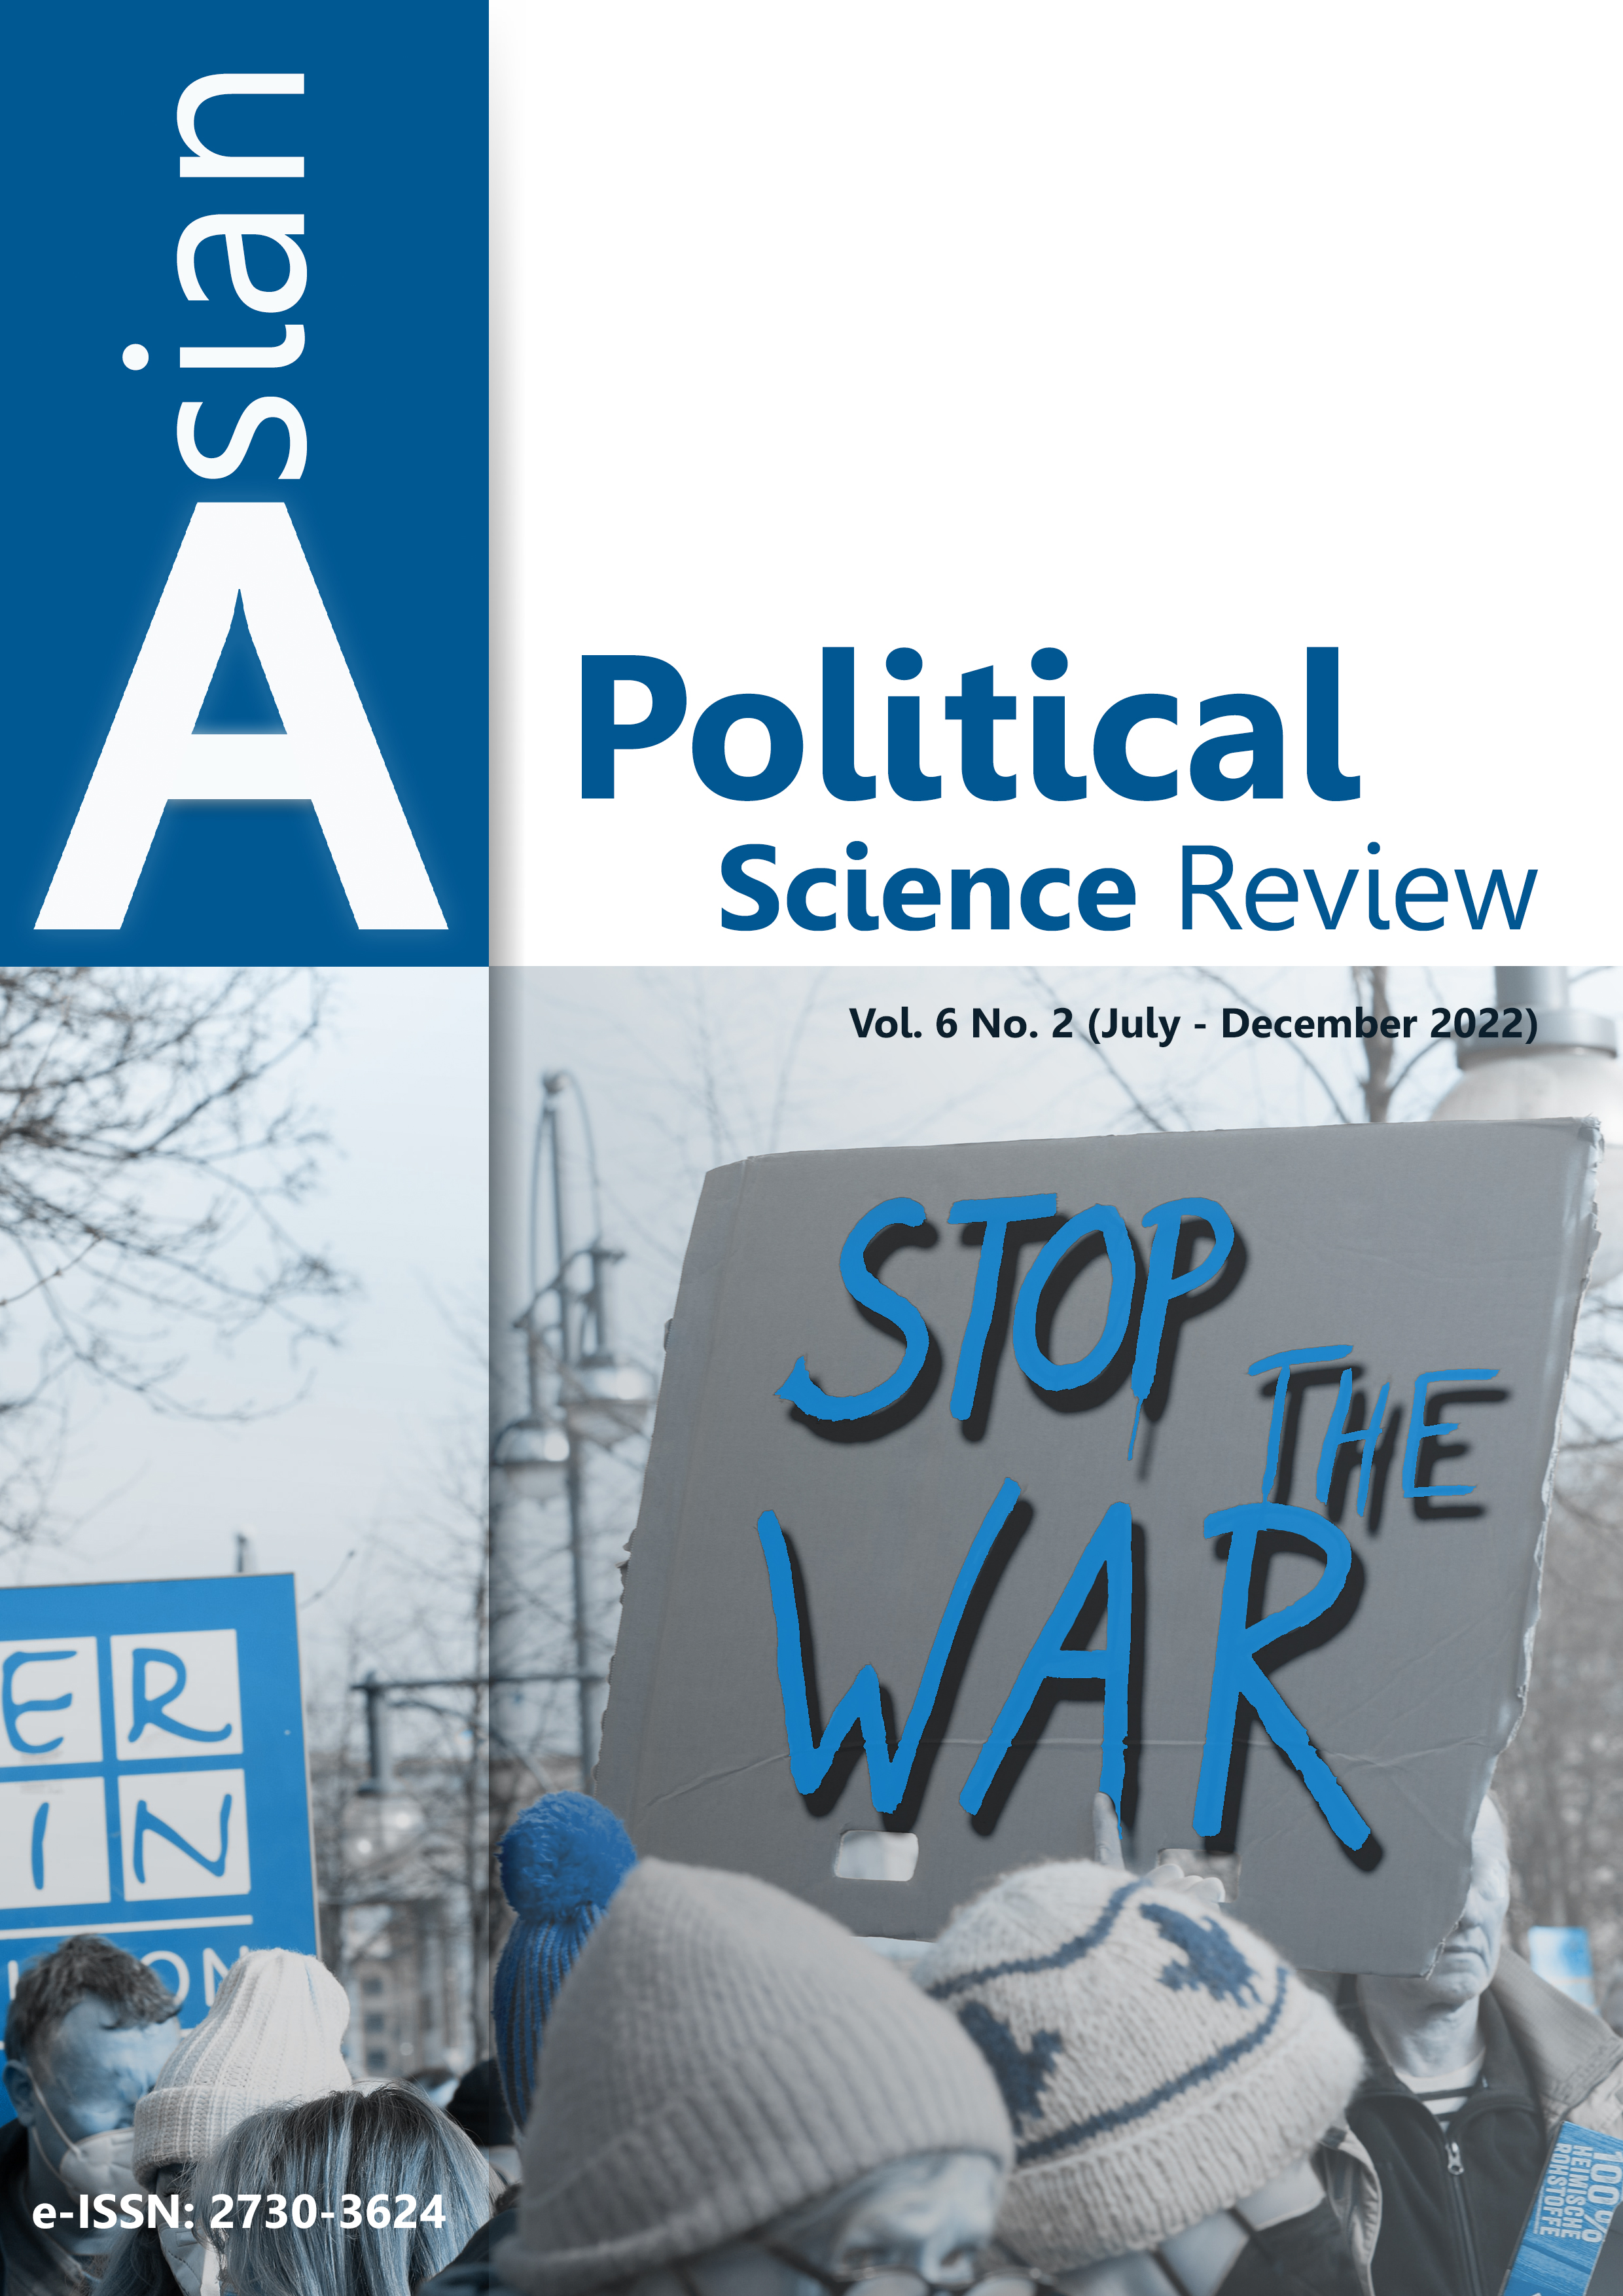 					View Vol. 6 No. 2 (2022): Asian Political Science Review
				